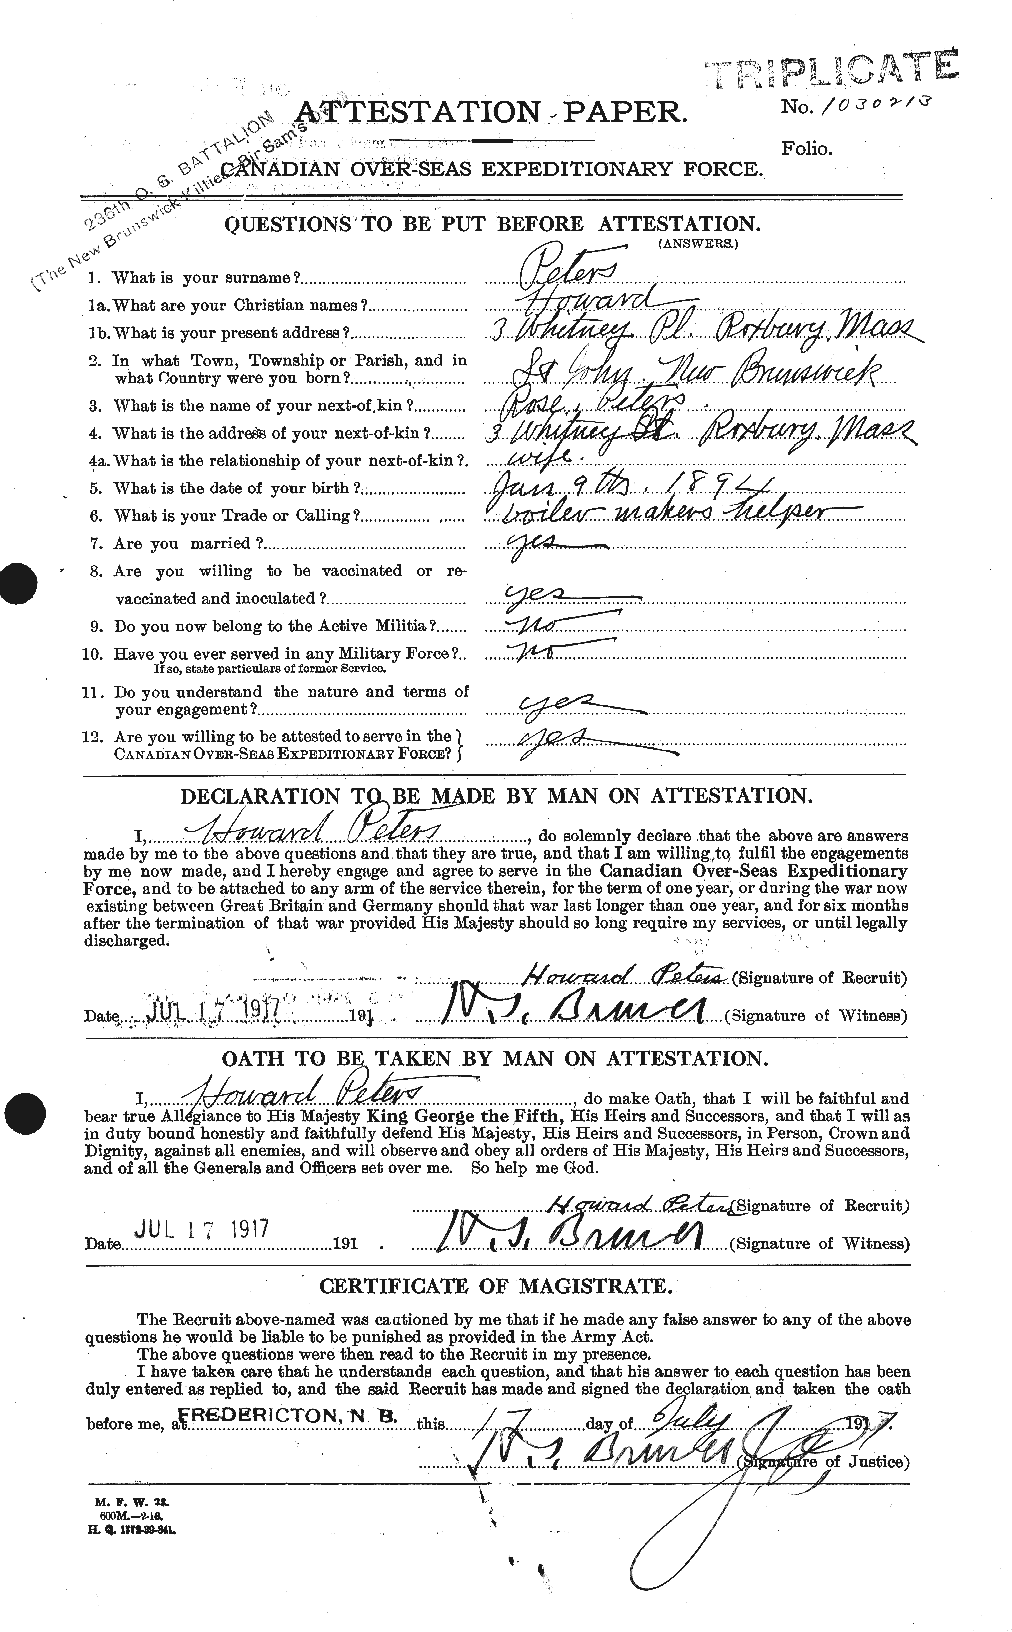 Personnel Records of the First World War - CEF 575503a